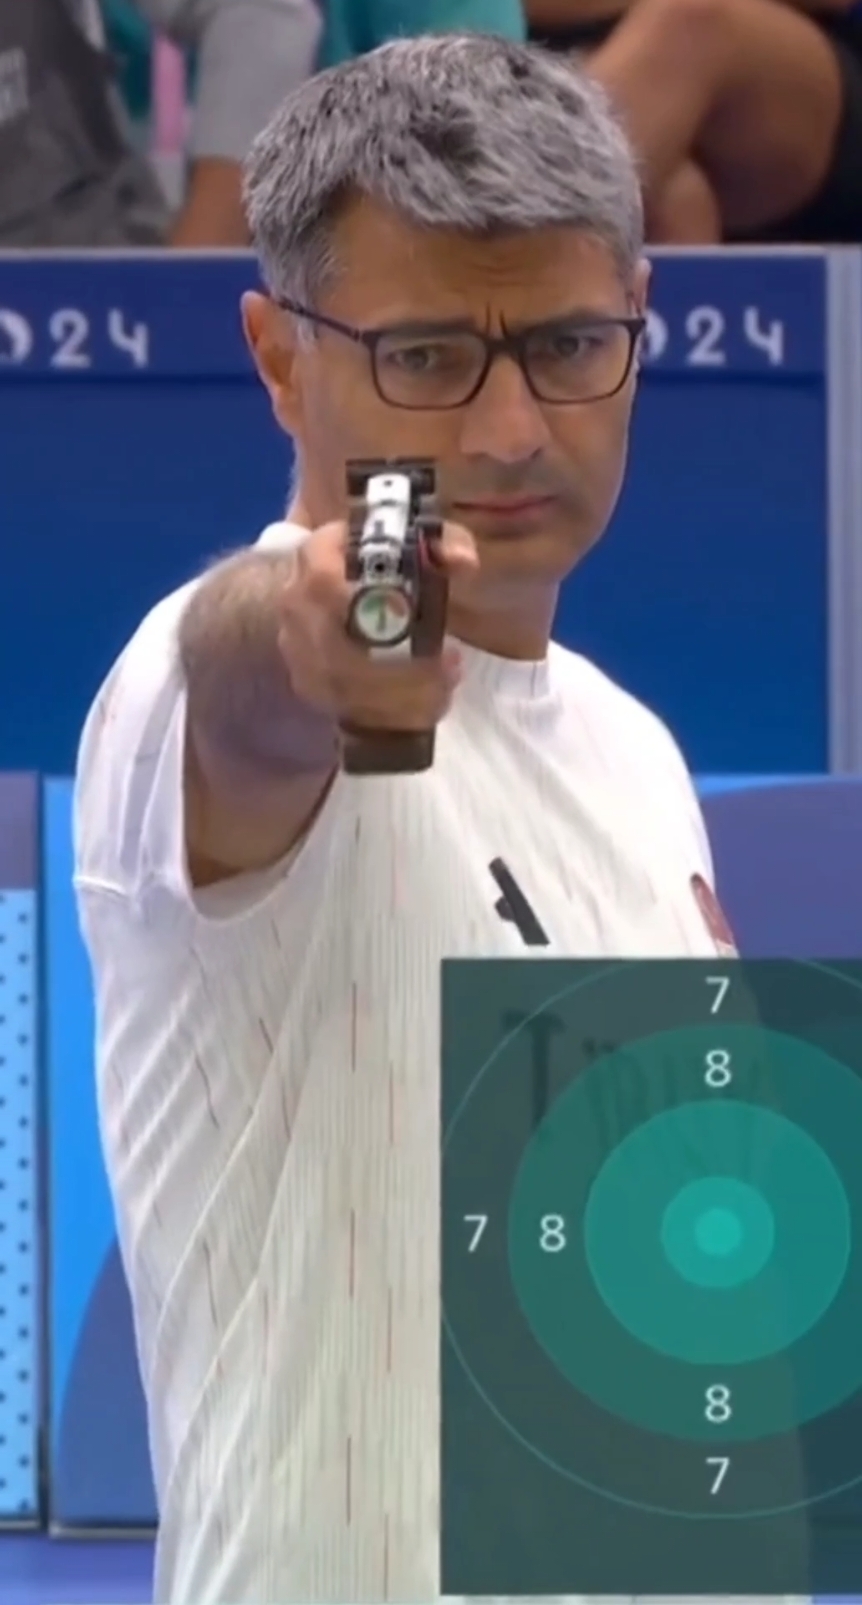 STRAIGHT OUT OF A MOVIE😎 Turkey's pistol shooter Yusuf Dikec caught public attention through his smooth shooting talent in the mixed 10-meter air pistol without having to use any special equipment. Dikec is a 51-year-old retired police officer who bagged silver at the Olympic Games Paris 2024.